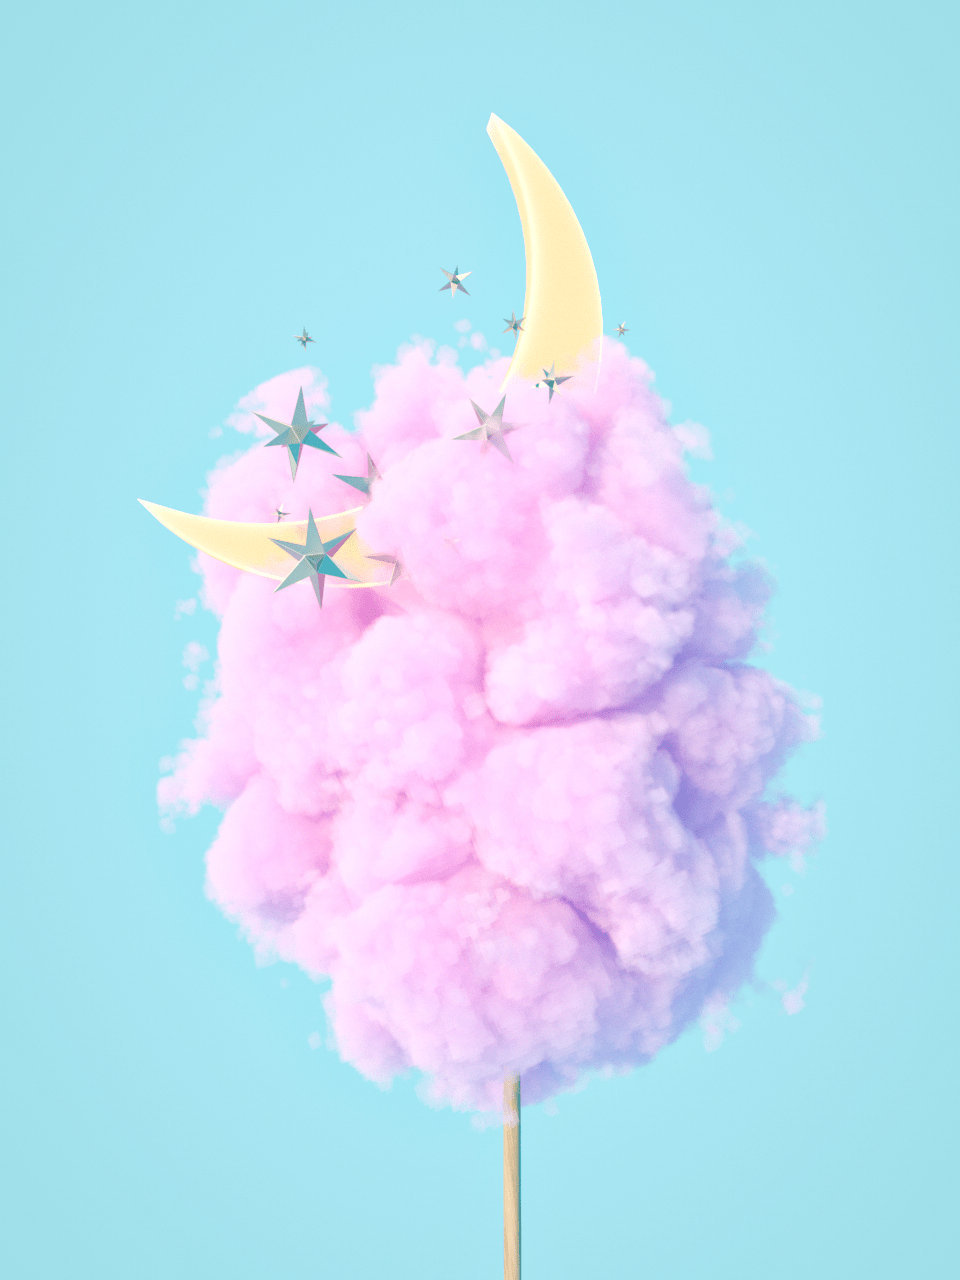 3D nonsense projects. Pastel photography, Pastel aesthetic, Pretty wallpaper